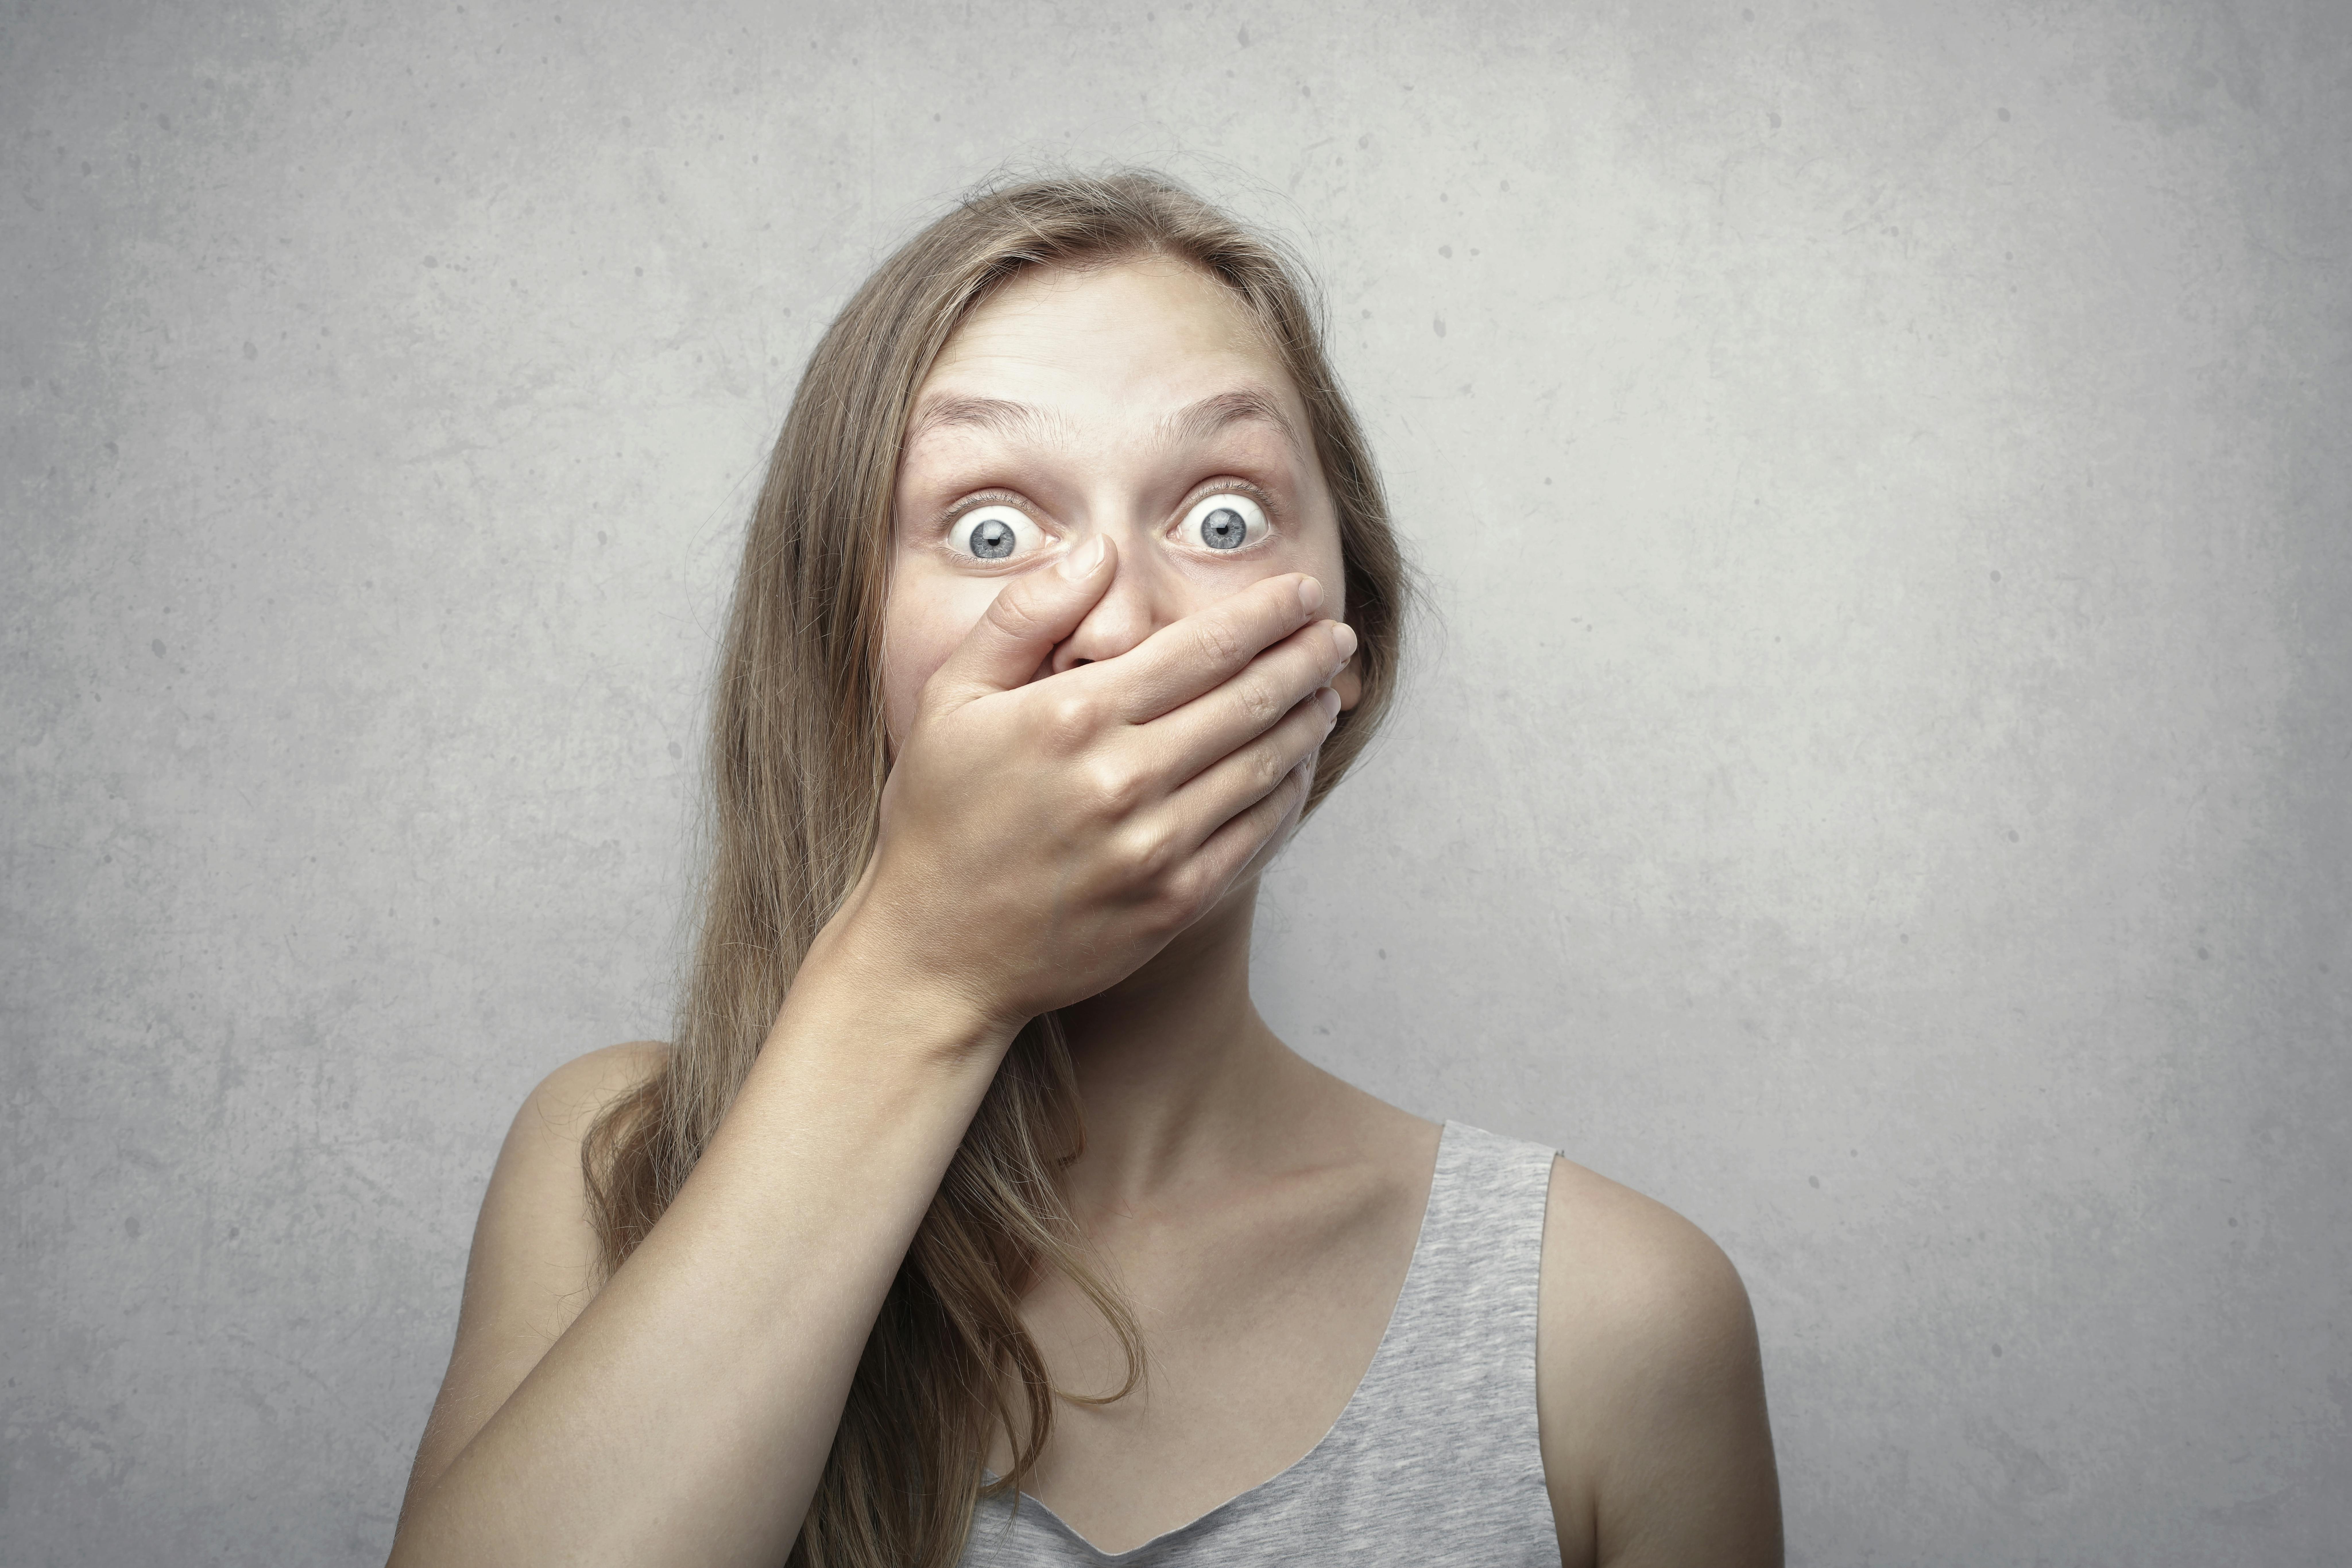 Shocked woman covers her mouth | Source: Pexels